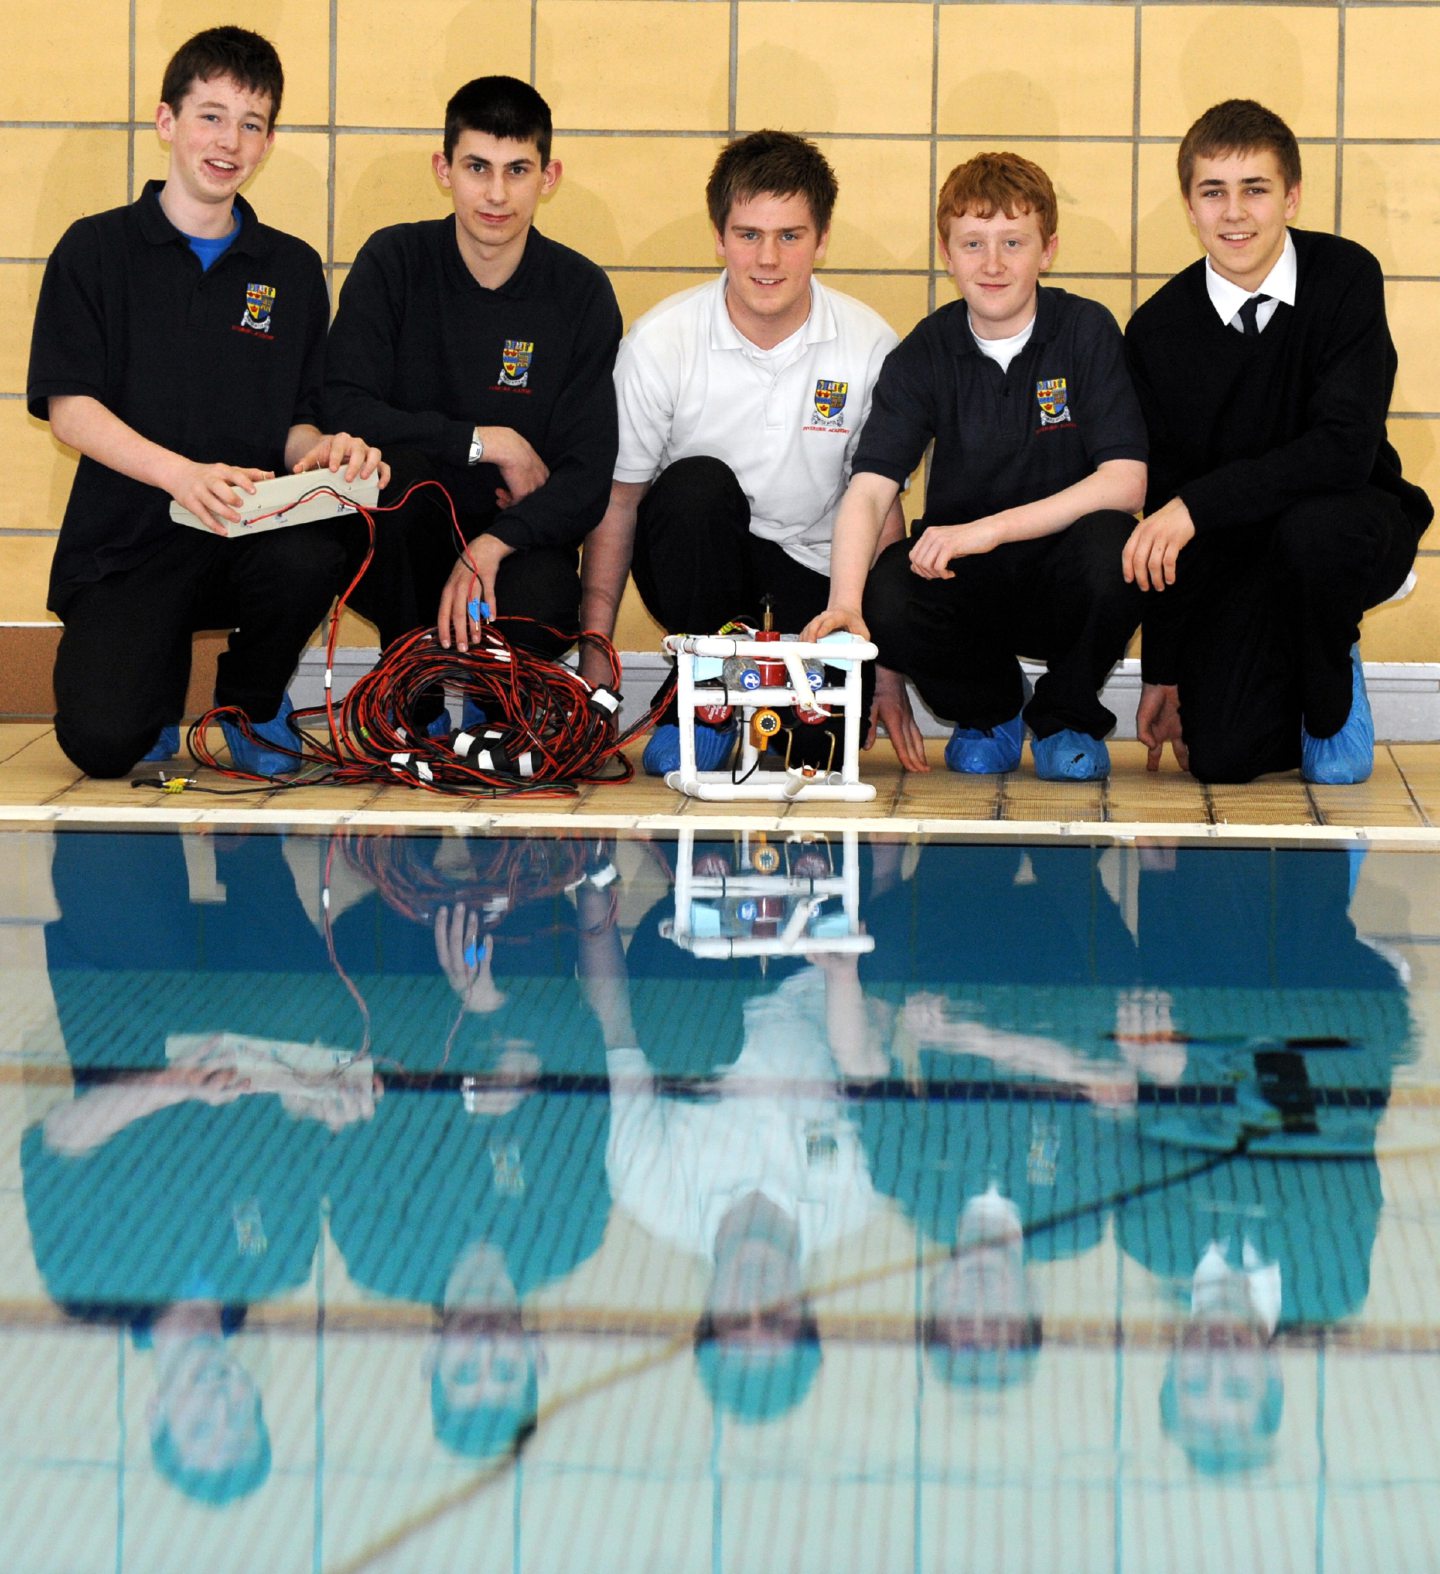 Inverurie Academy pupils next to the pool